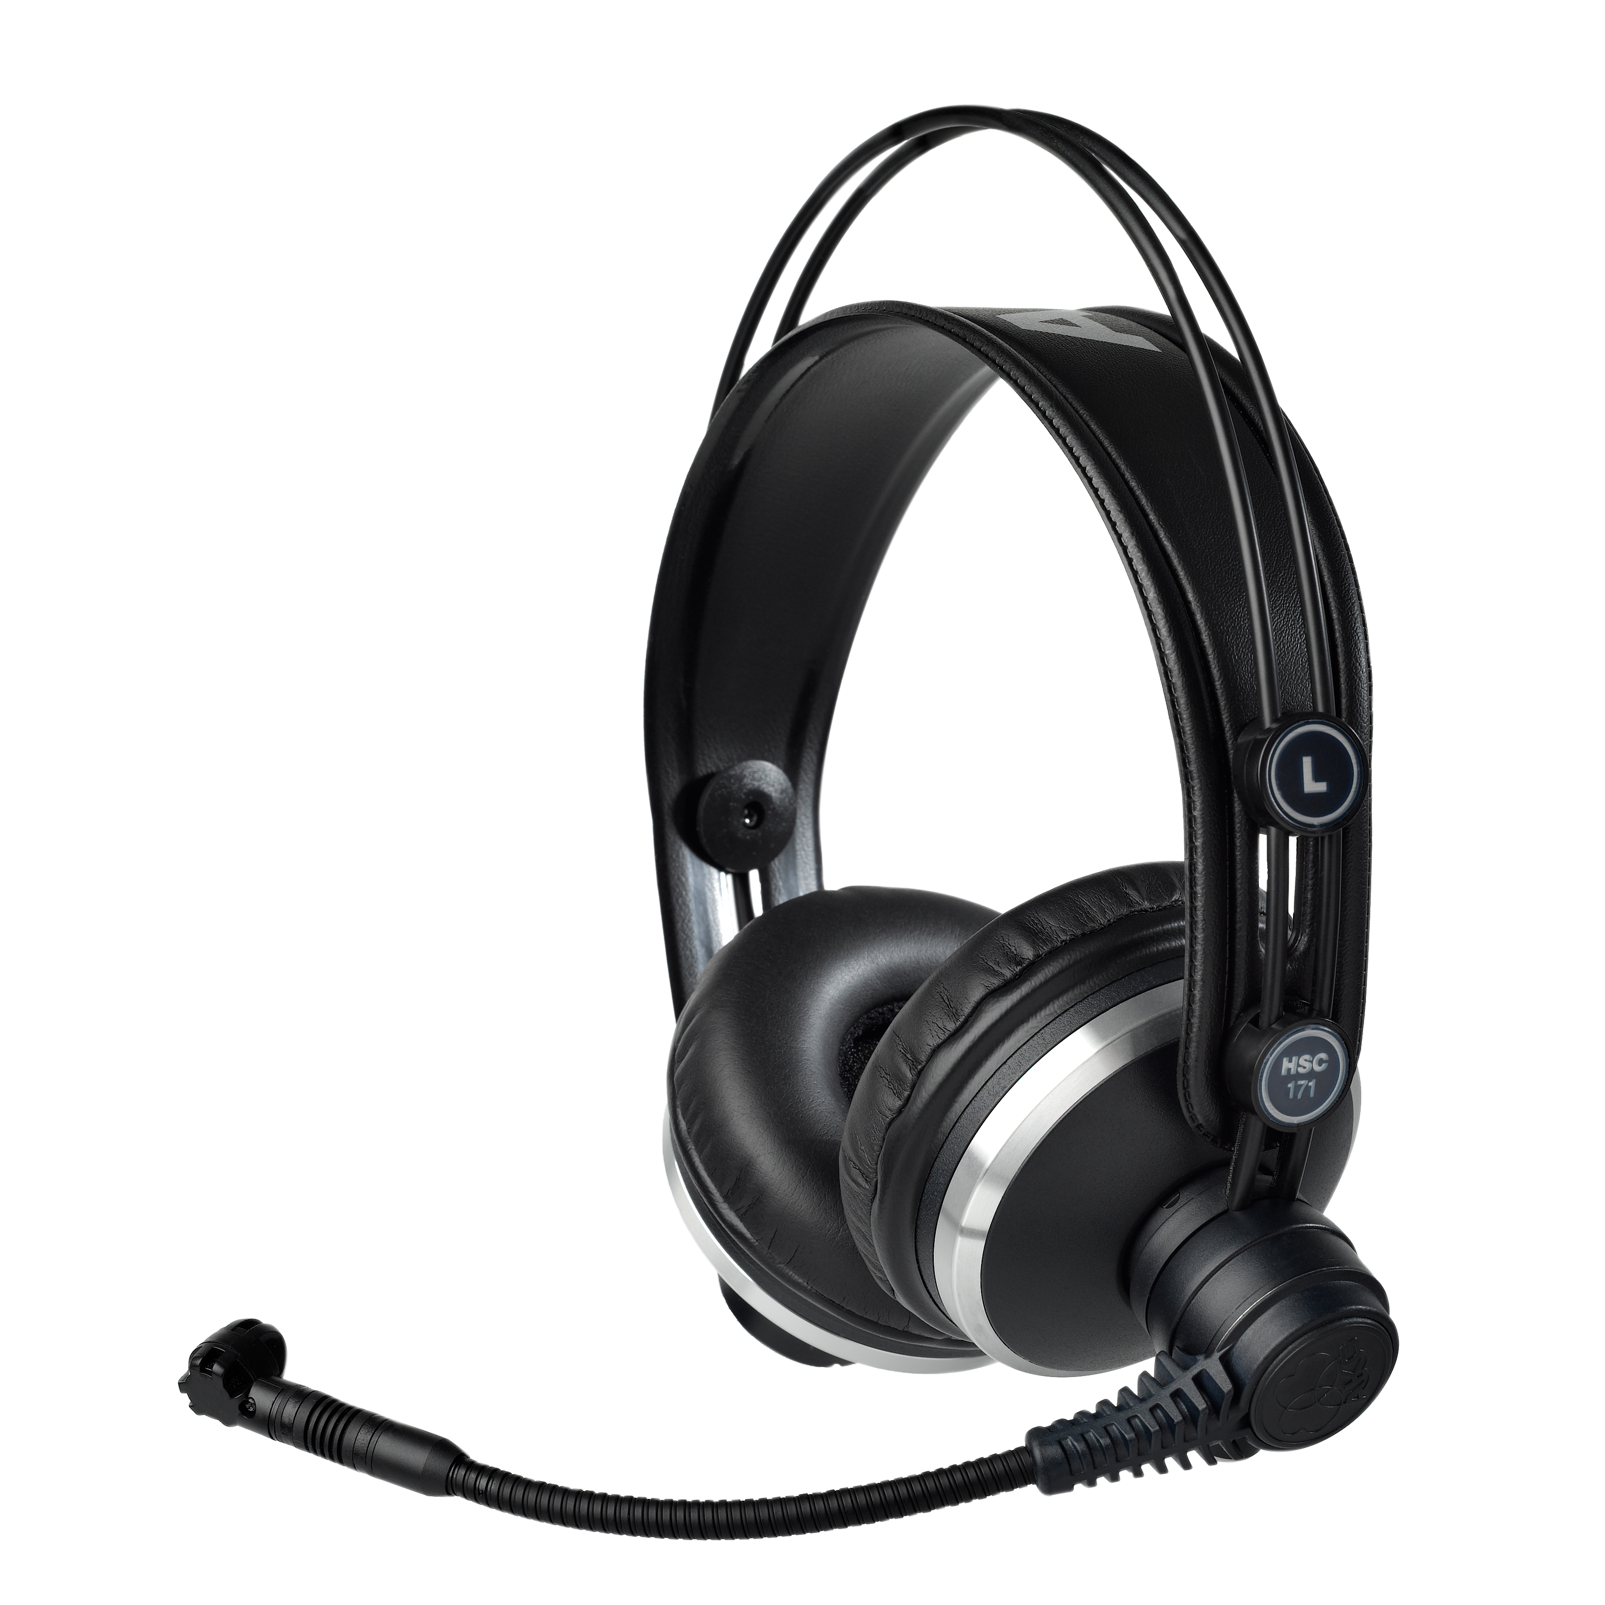 HSC171 - Black - Professional on-ear headset with condenser microphone - Hero